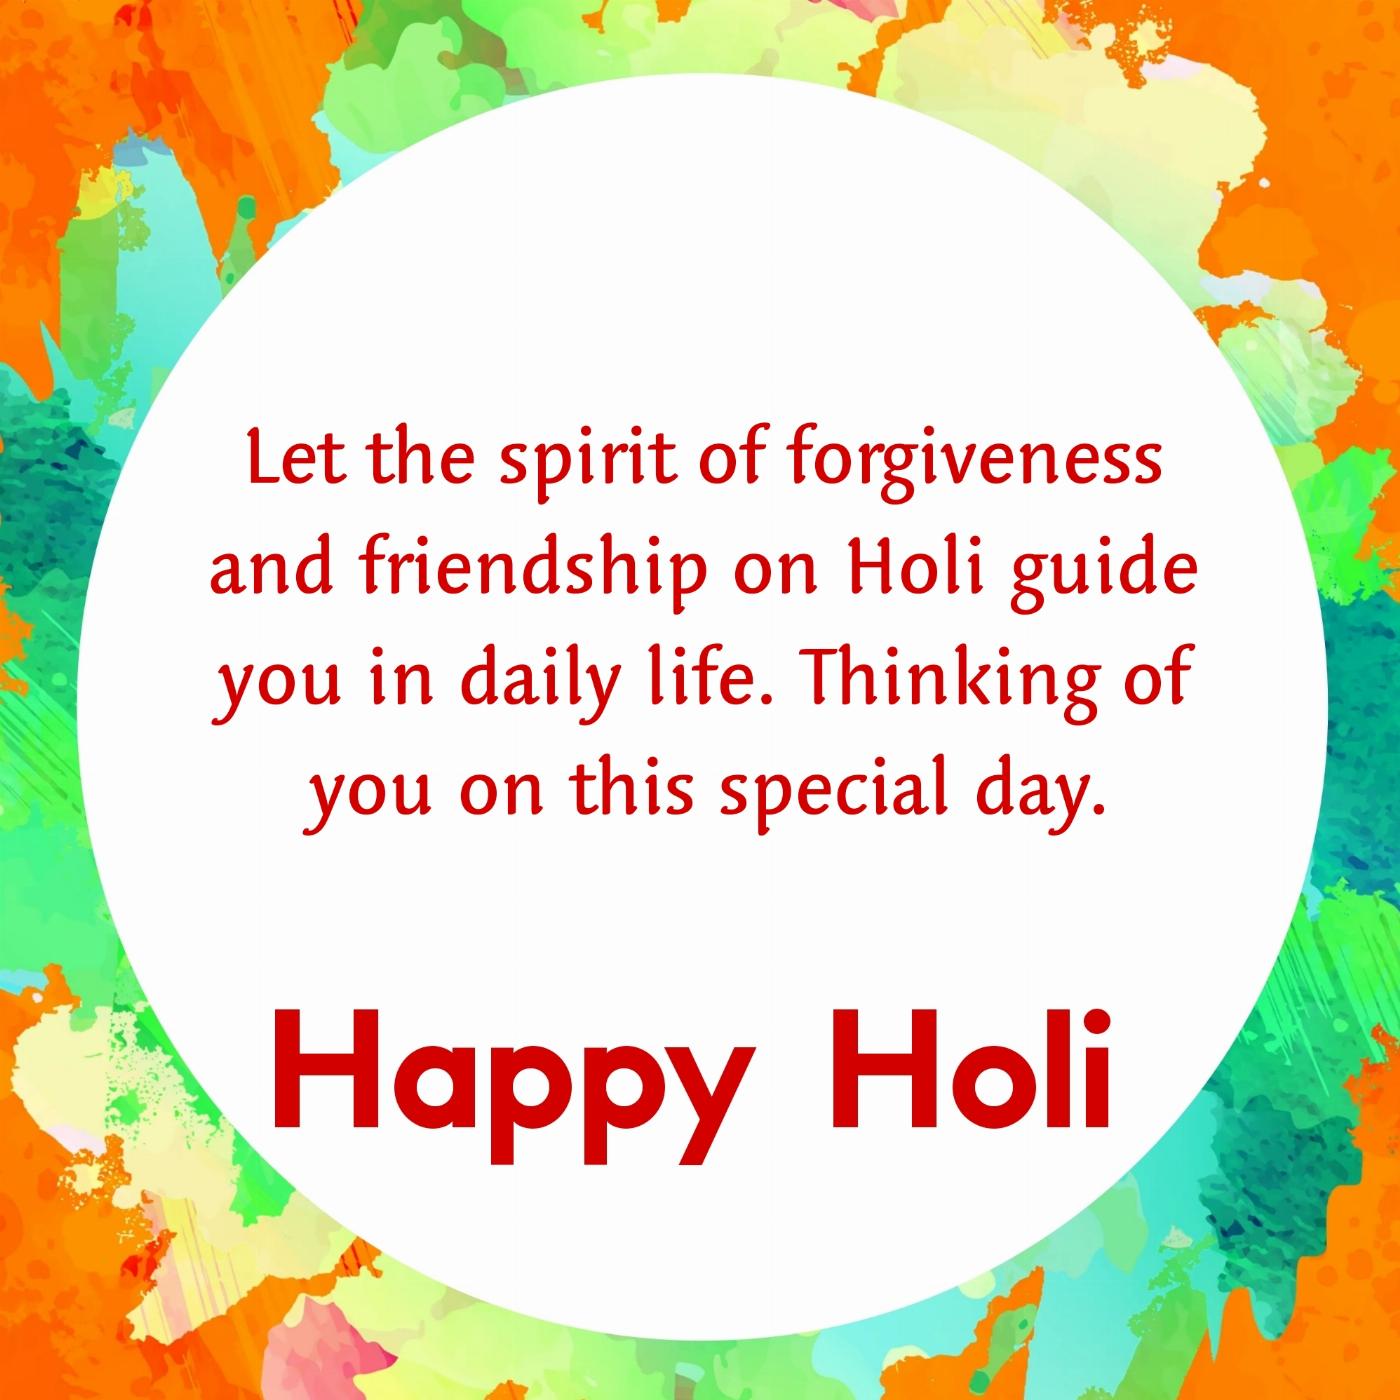 Let the spirit of forgiveness and friendship on Holi guide you